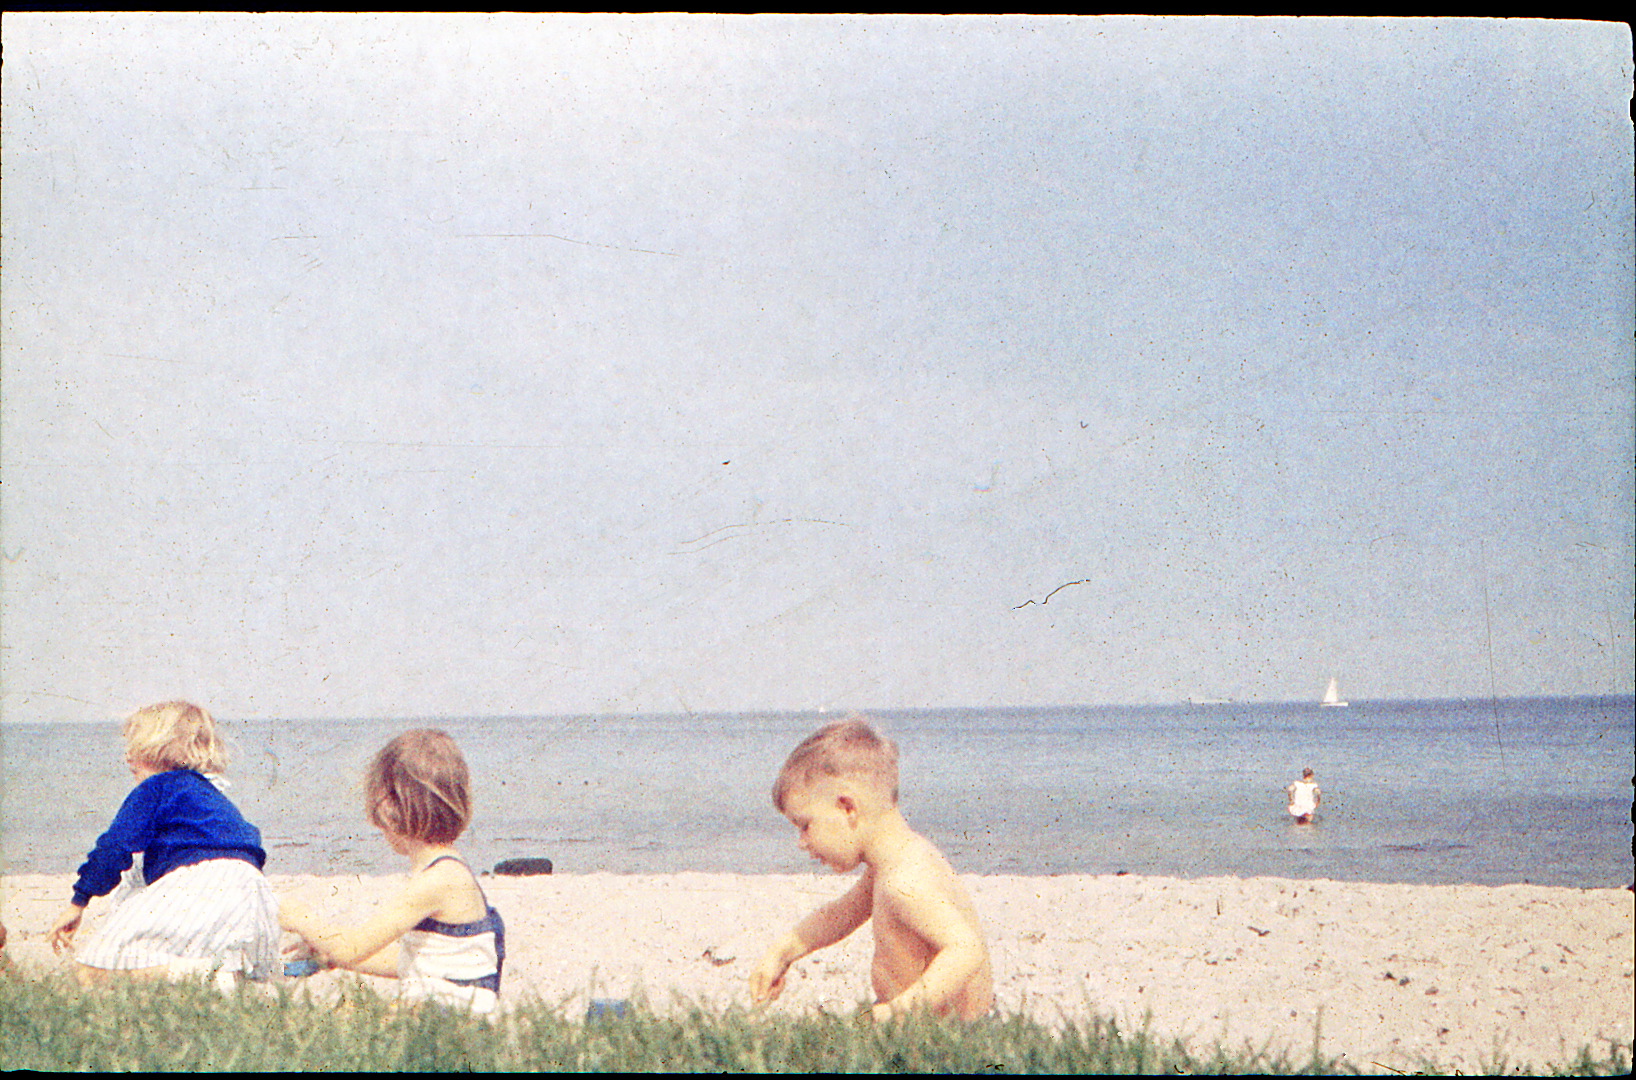 Bonnie, Wendee, and Corey at the beach